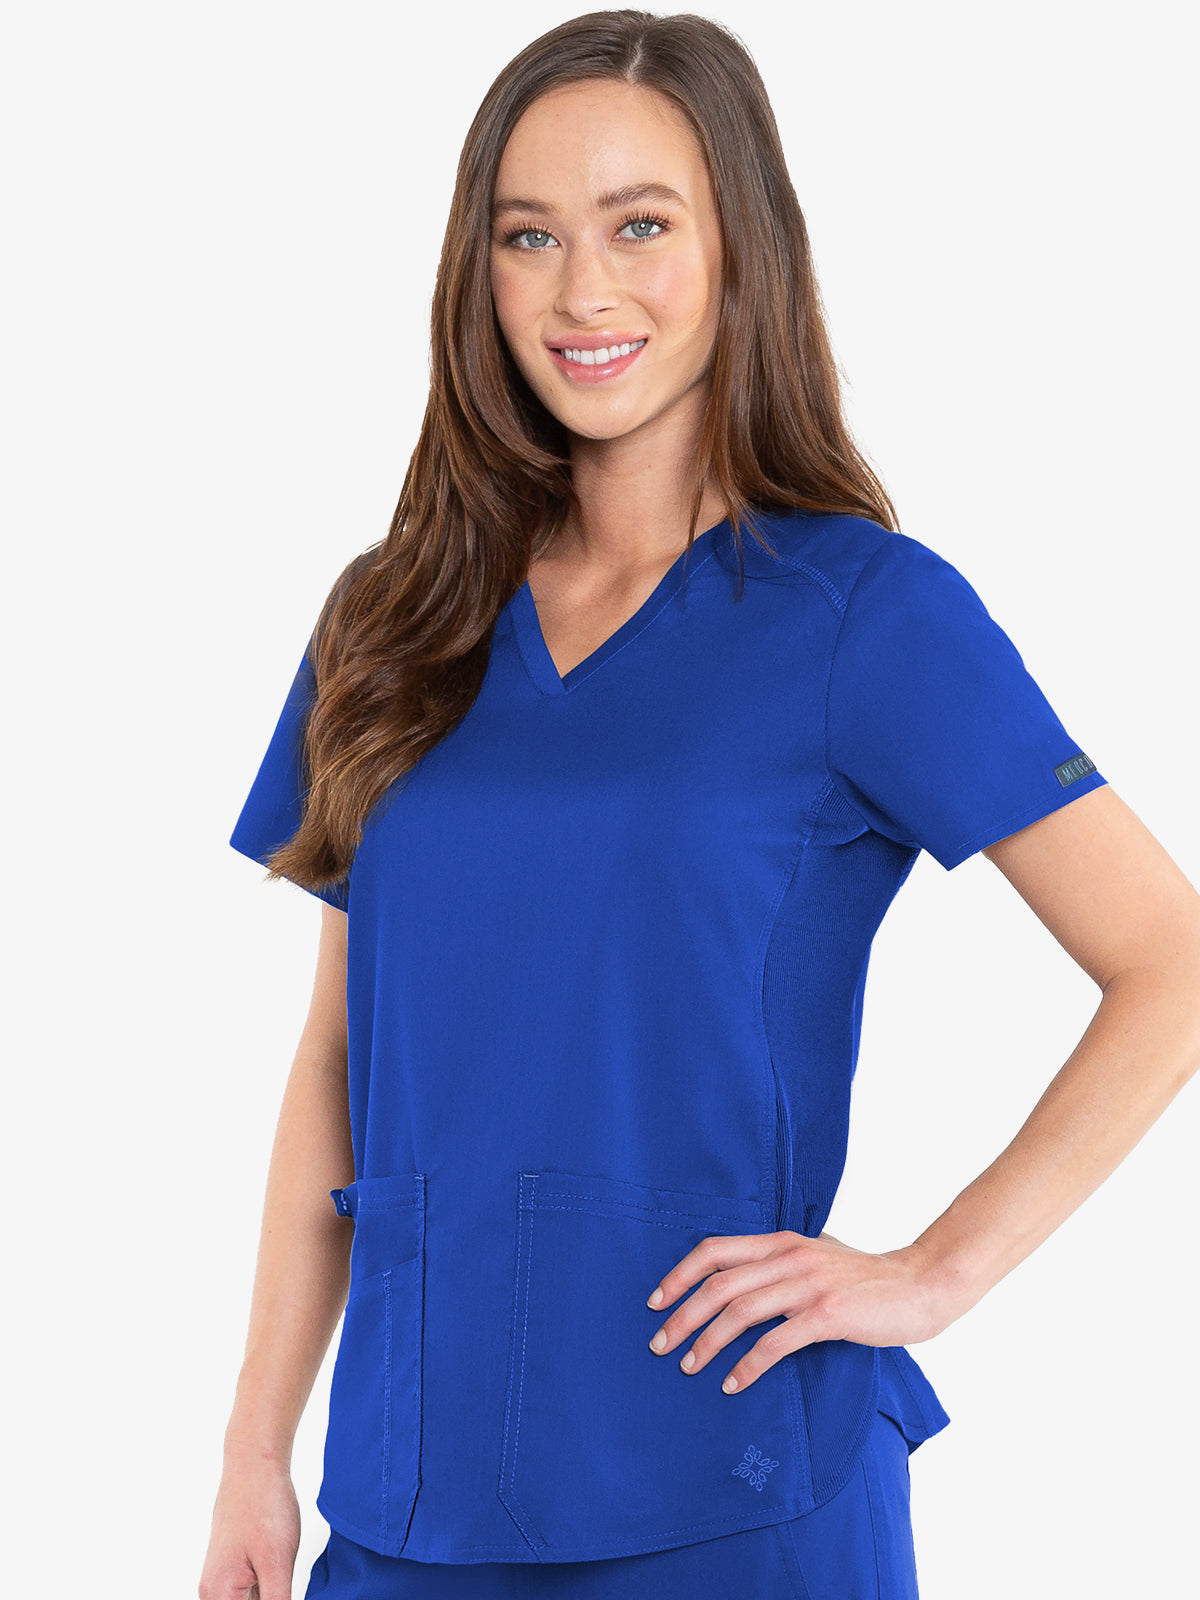 Med Couture Touch 7459 Women's V-Neck Shirttail Top Royal